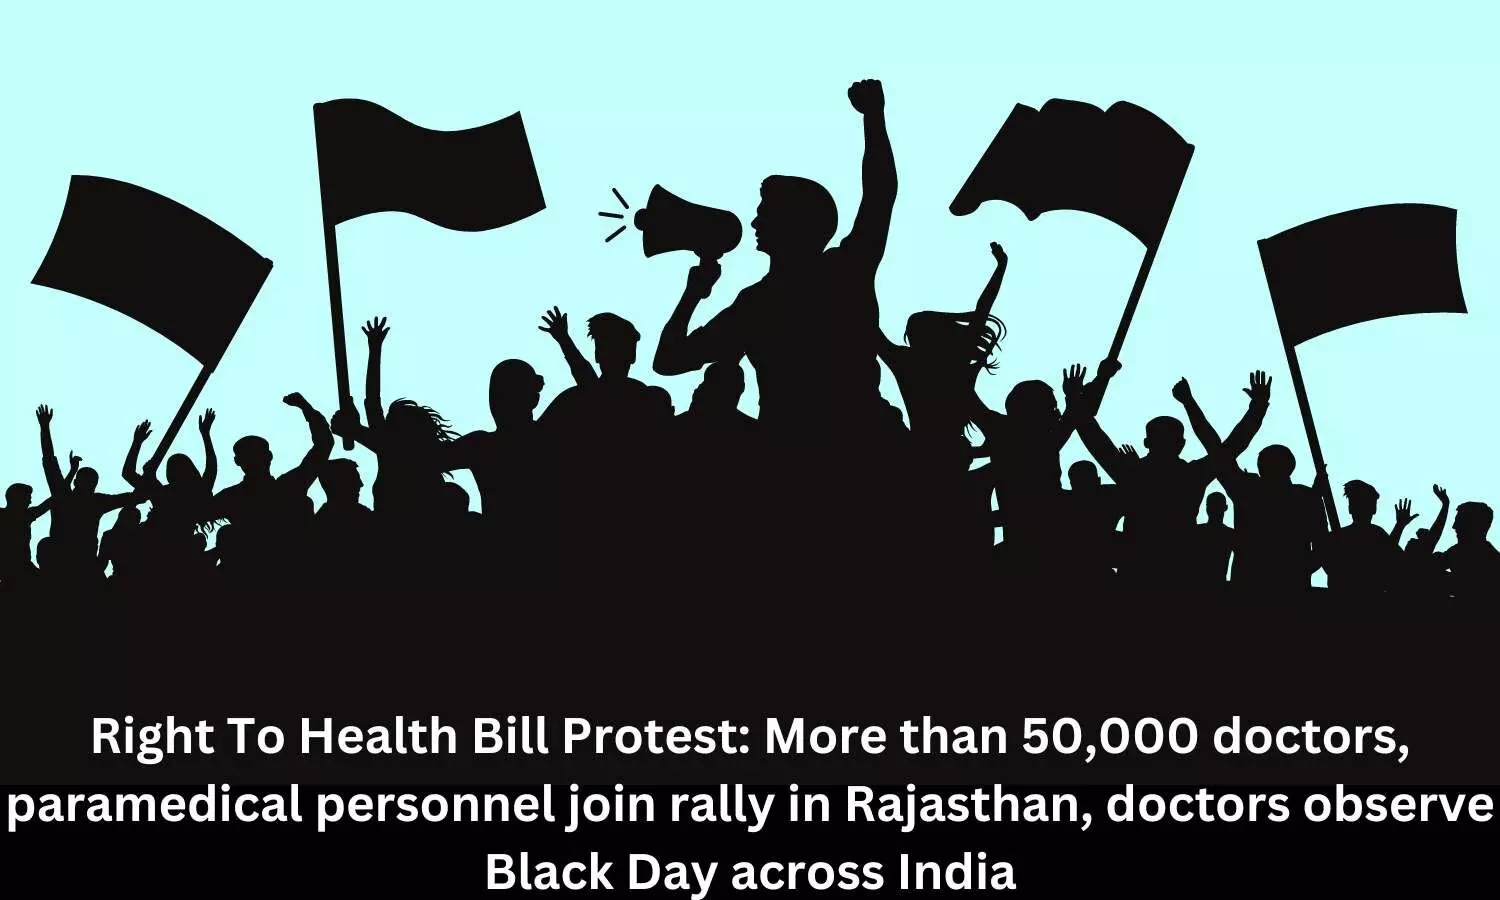 Right to Health Bill Protest: Over 50,000 doctors, paramedical personnel join rally in Rajasthan